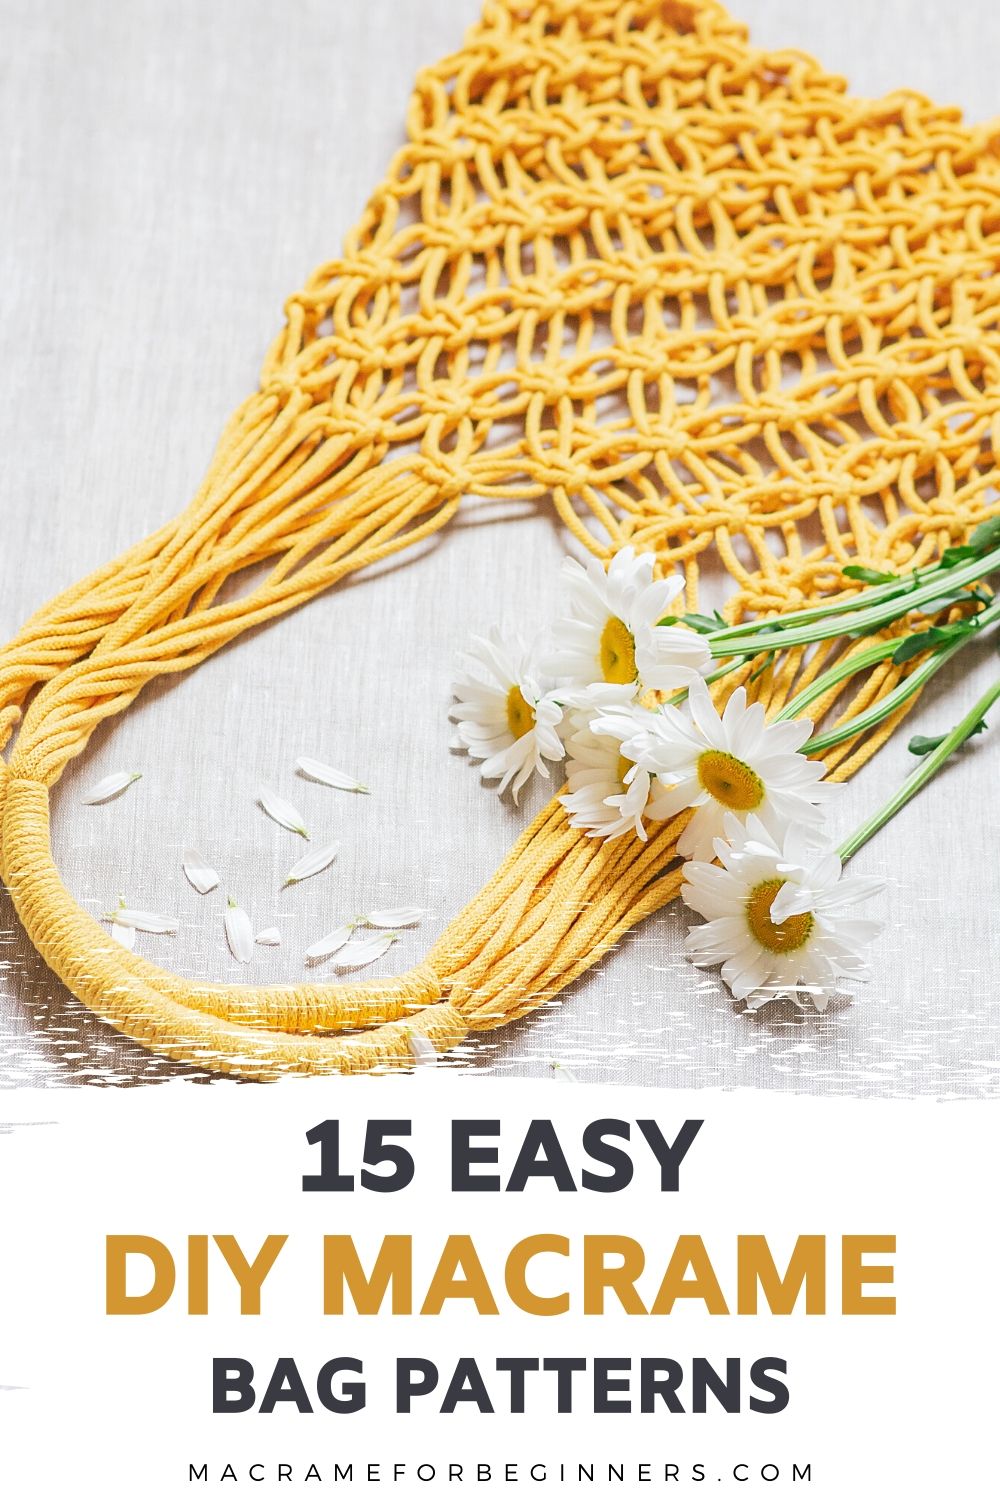 15 Easy DIY Macrame Bags, Purses and Clutches for Beginners 